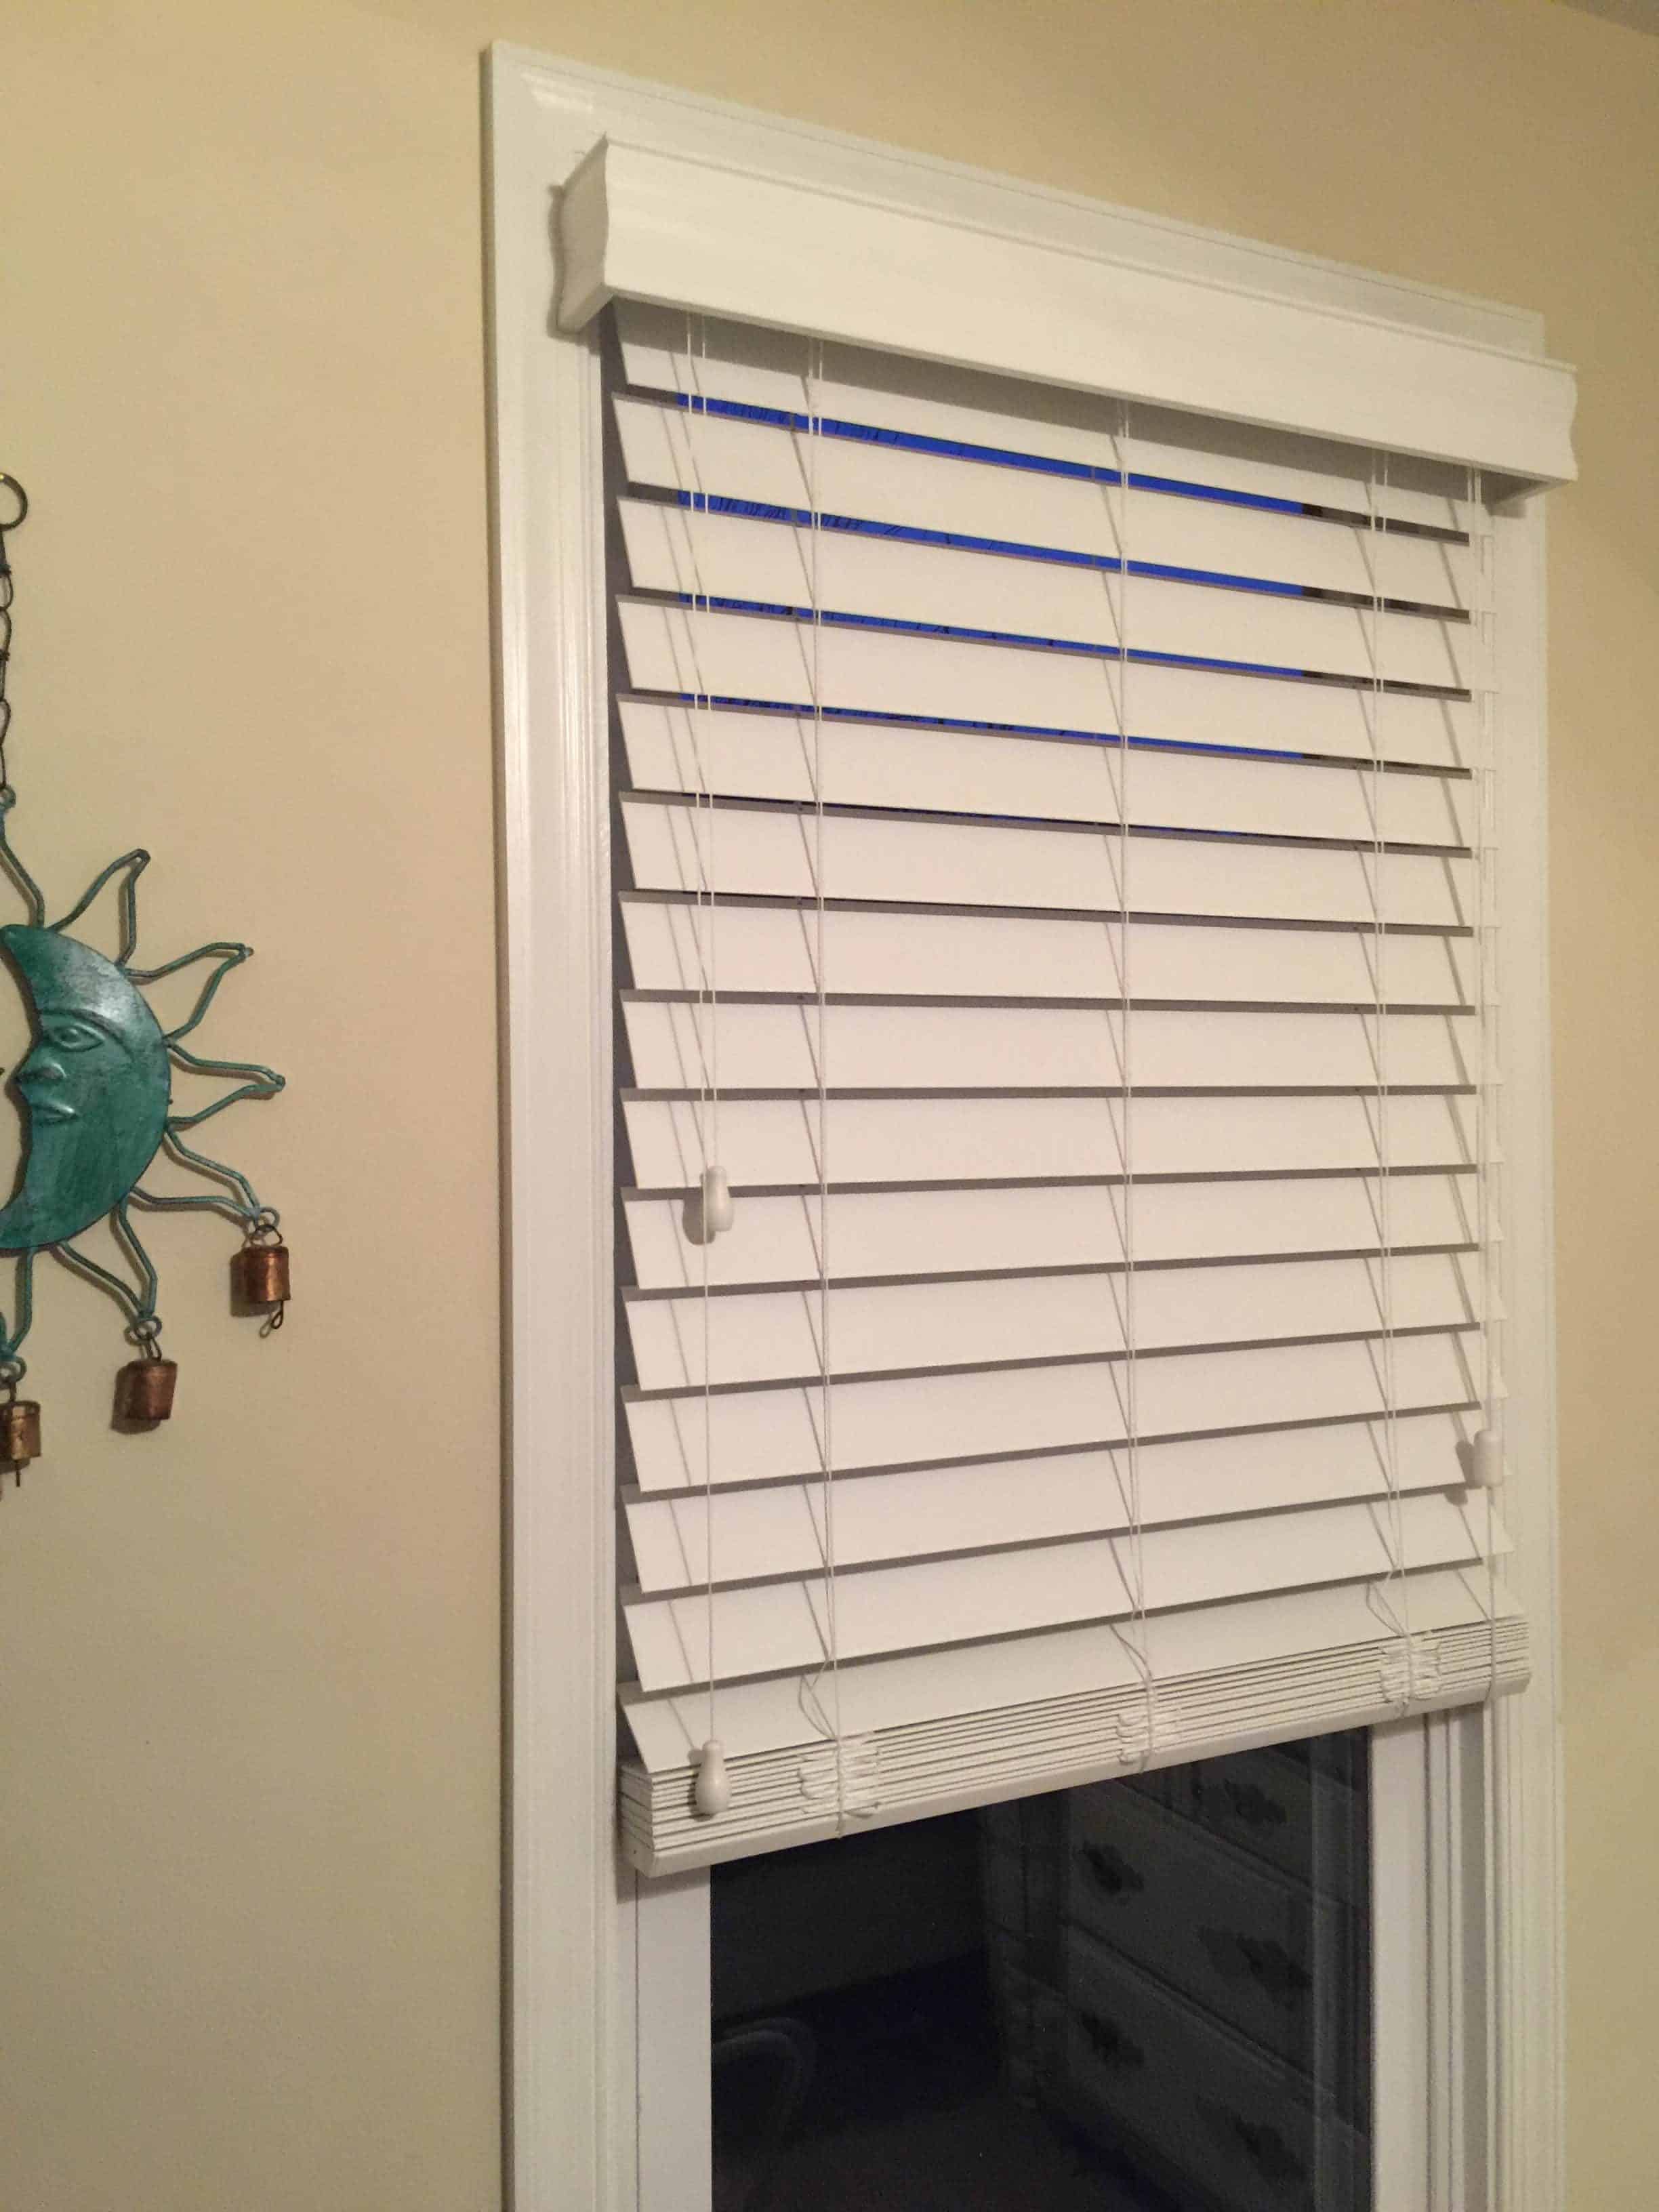 Best Place to Order Window Blinds: Why Choose Blinds Brothers